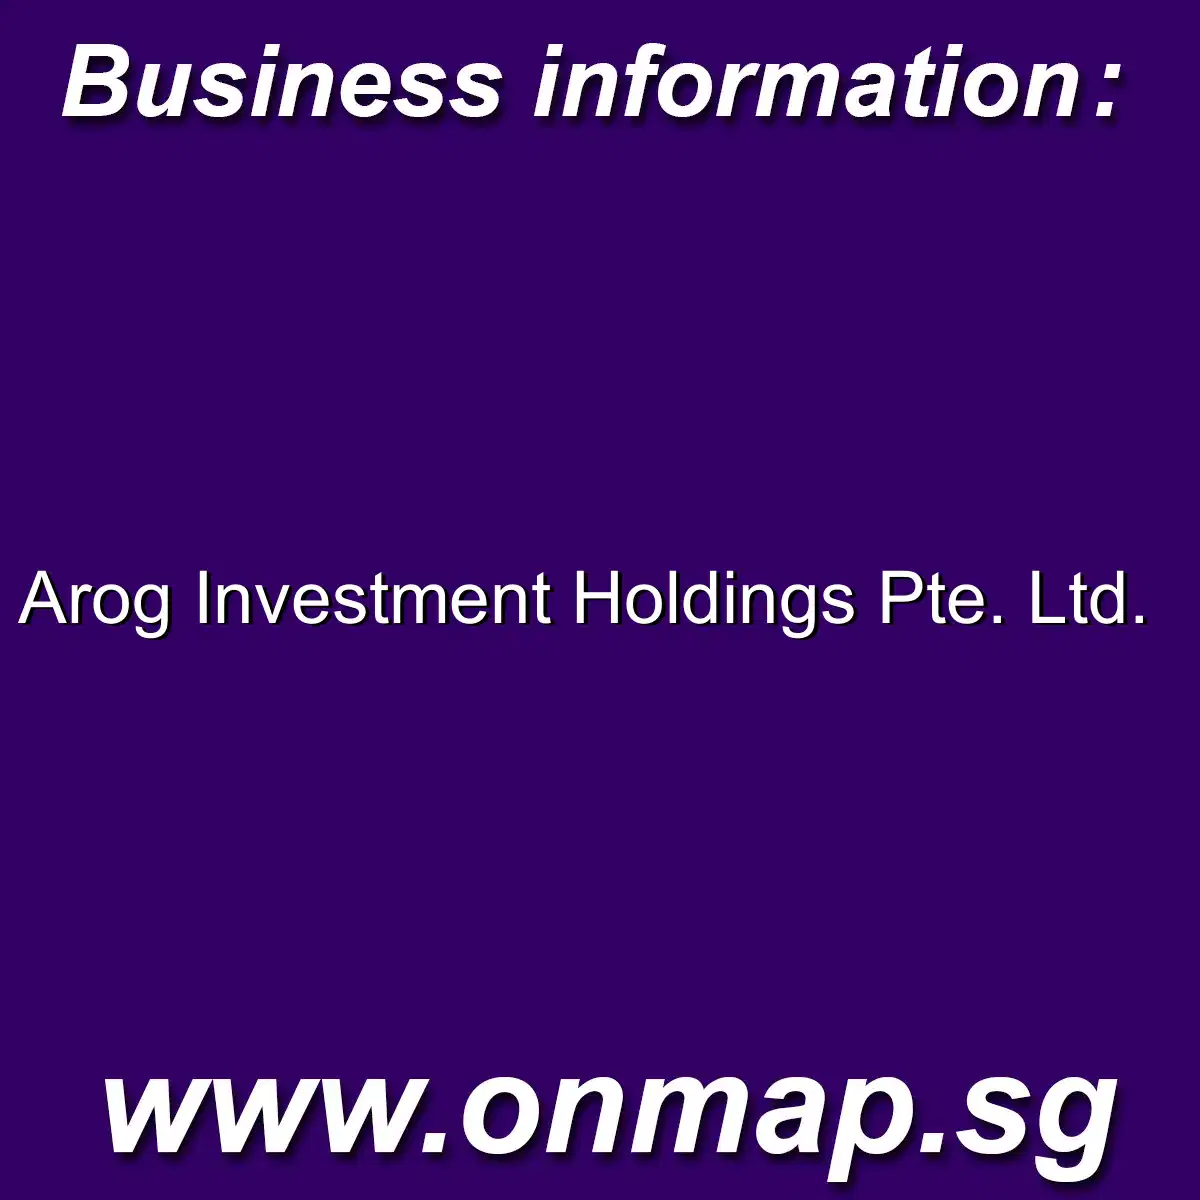 Arog Investment Holdings Pte. Ltd. - Details, Locations, Reviews